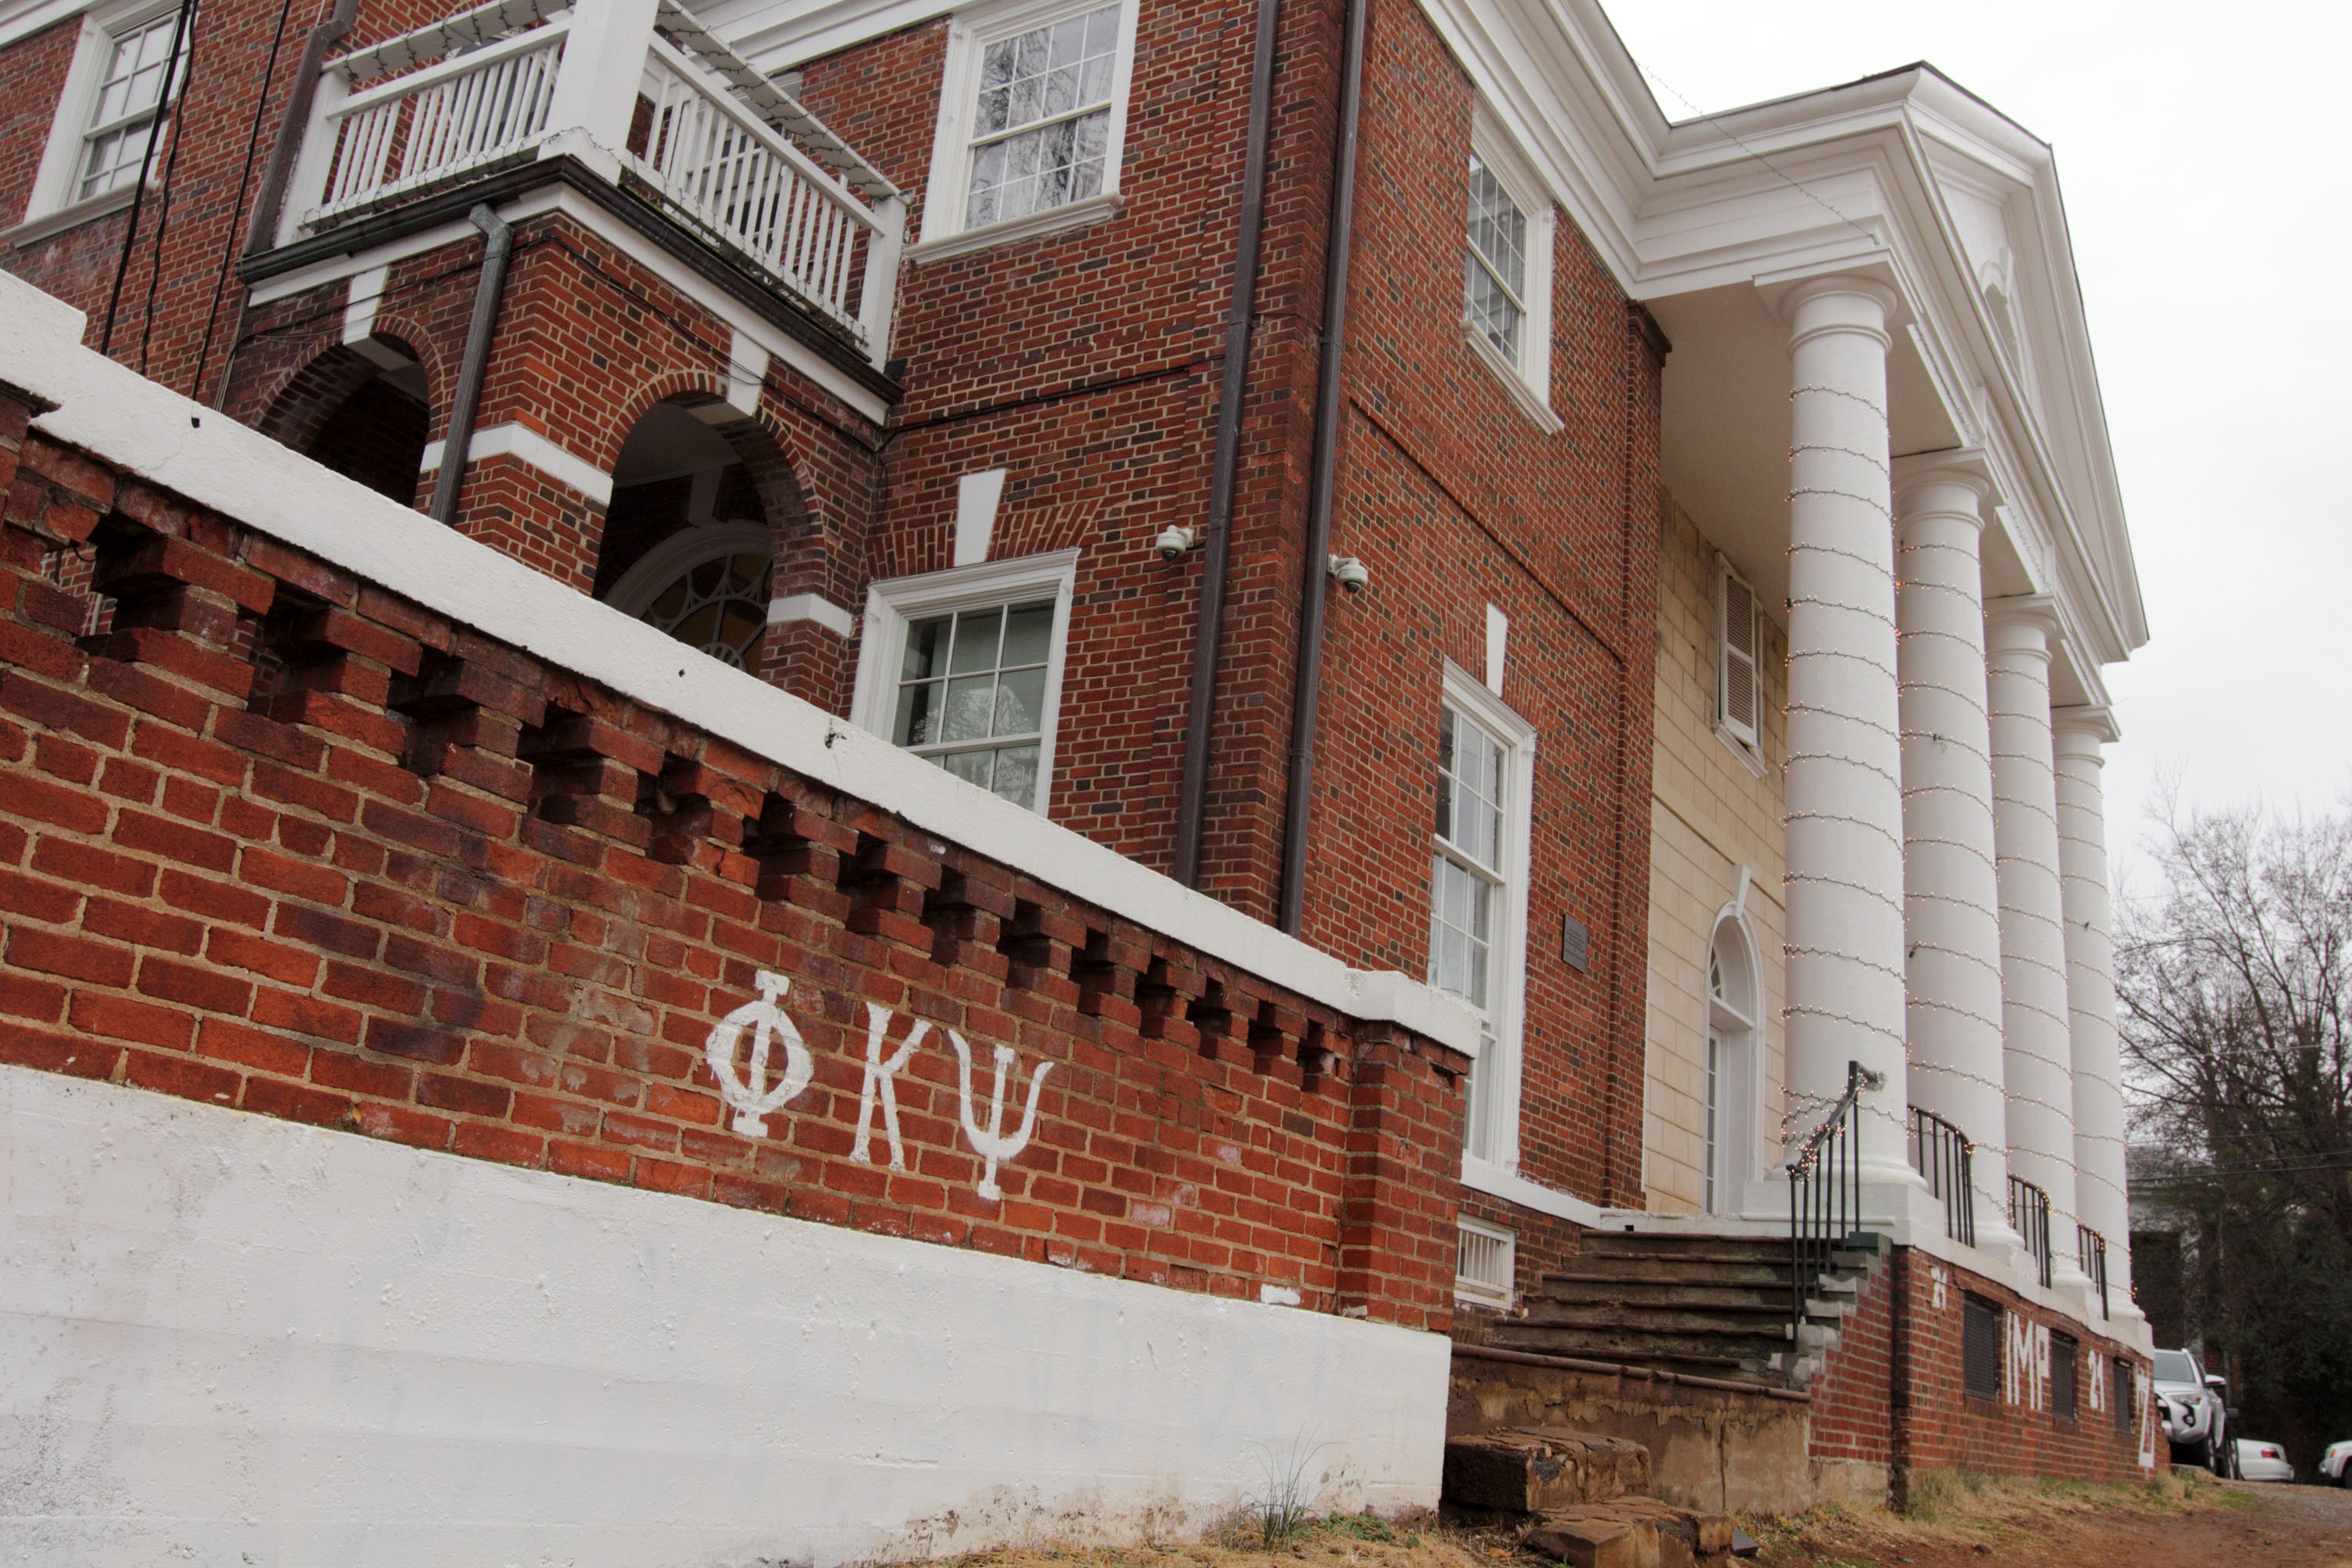 The Phi Kappa Psi fraternity house is seen on the University of Virginia campus on December 6, 2014 in Charlottesville, Virginia. (Getty)